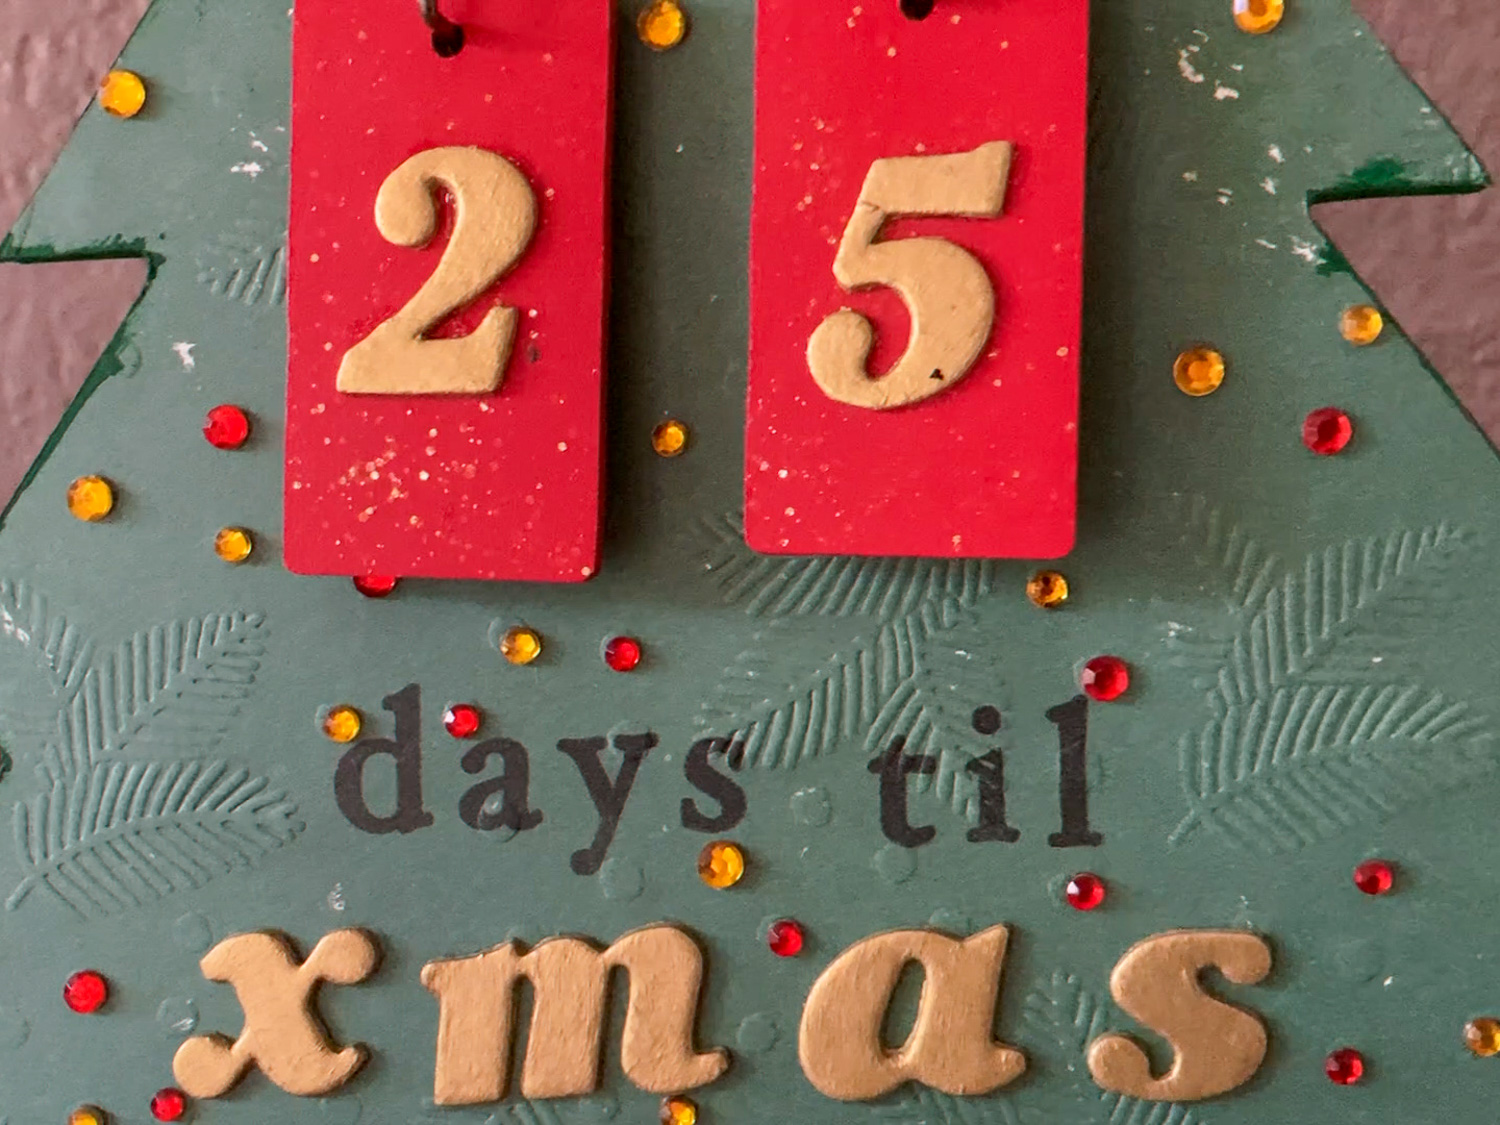 A green background with gold numbers 2 and 5 on red tiles, and the words "days til xmas"